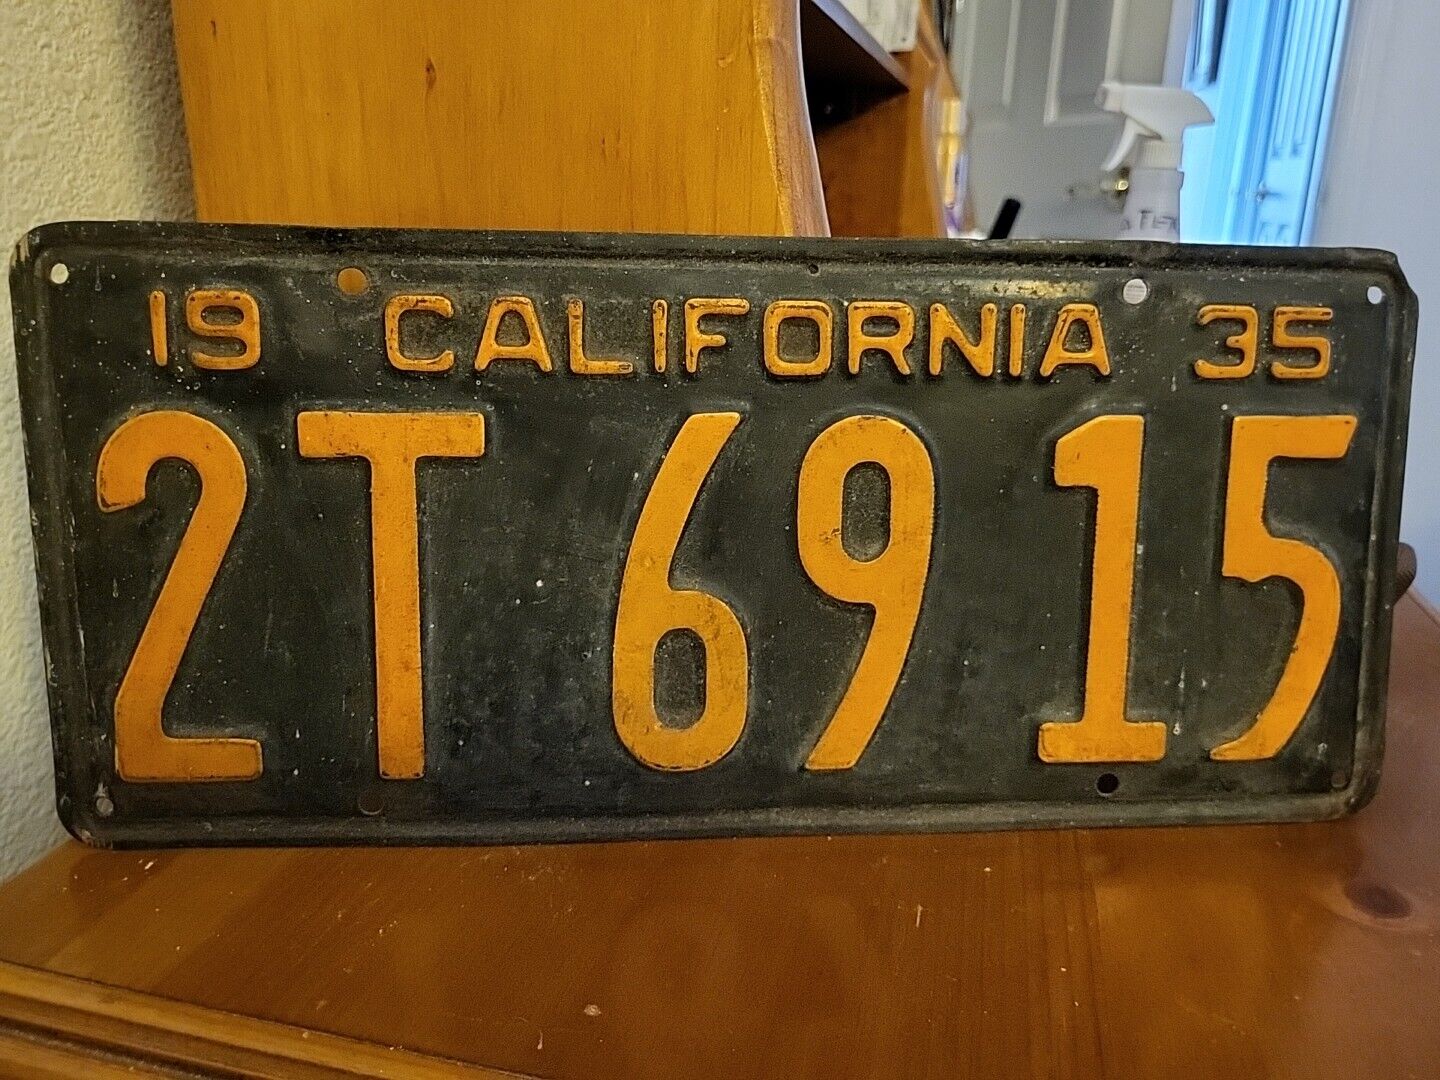 Vintage 1935 CALIFORNIA License Plate Tag #2T 6915 COUNTY Black INDENTED BORDER